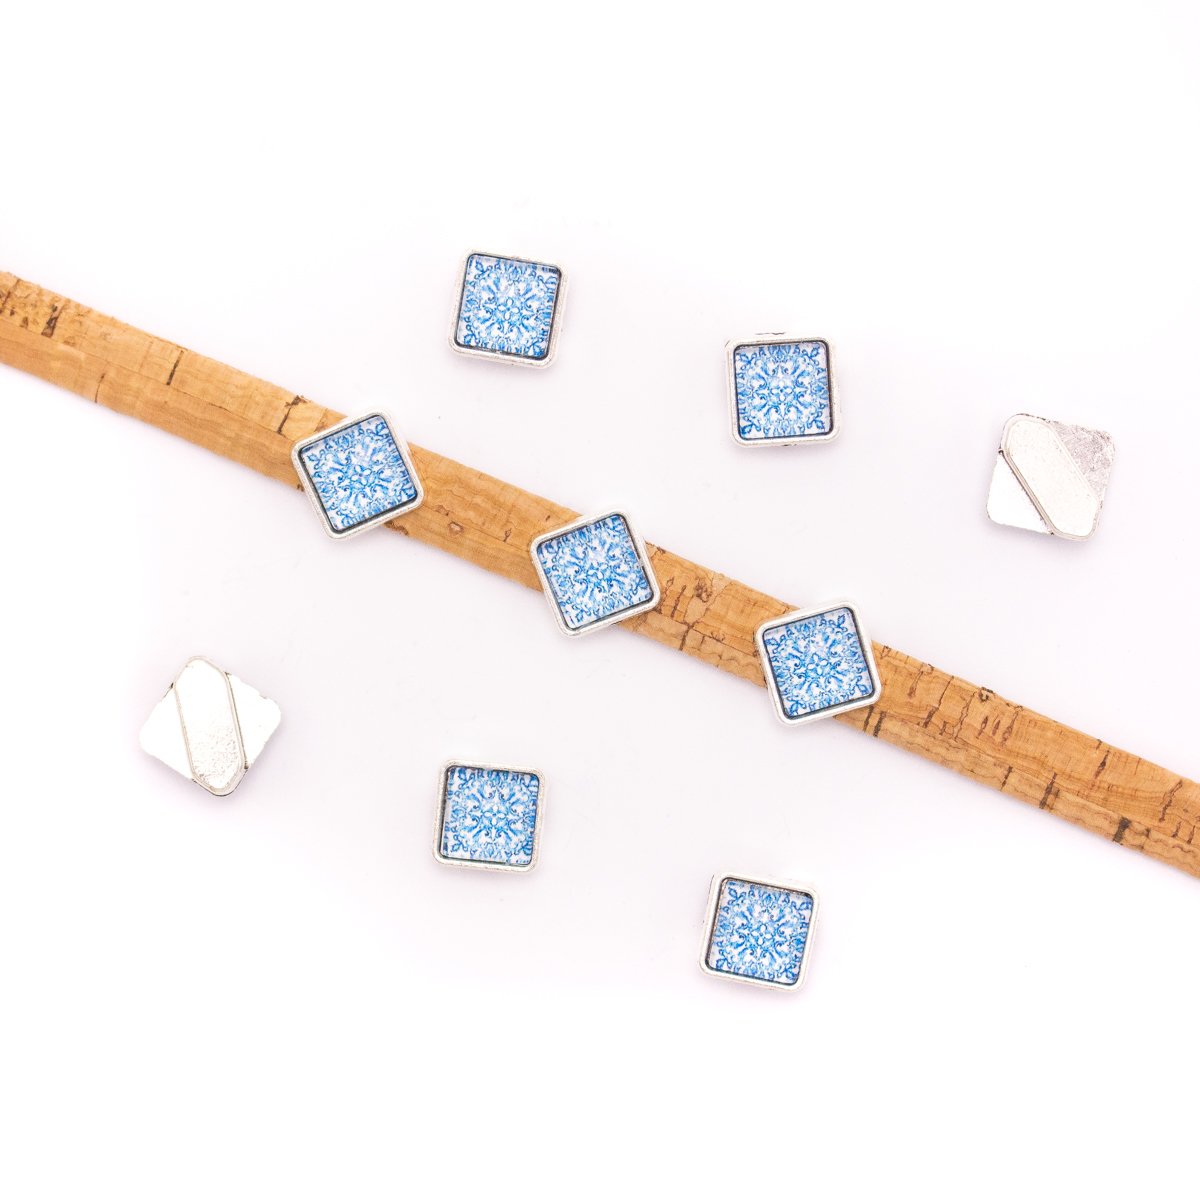 10units For 10mm flat cord slider with square Portuguese tiles for bracelet finding（12mm*12mm） D-1-10-222